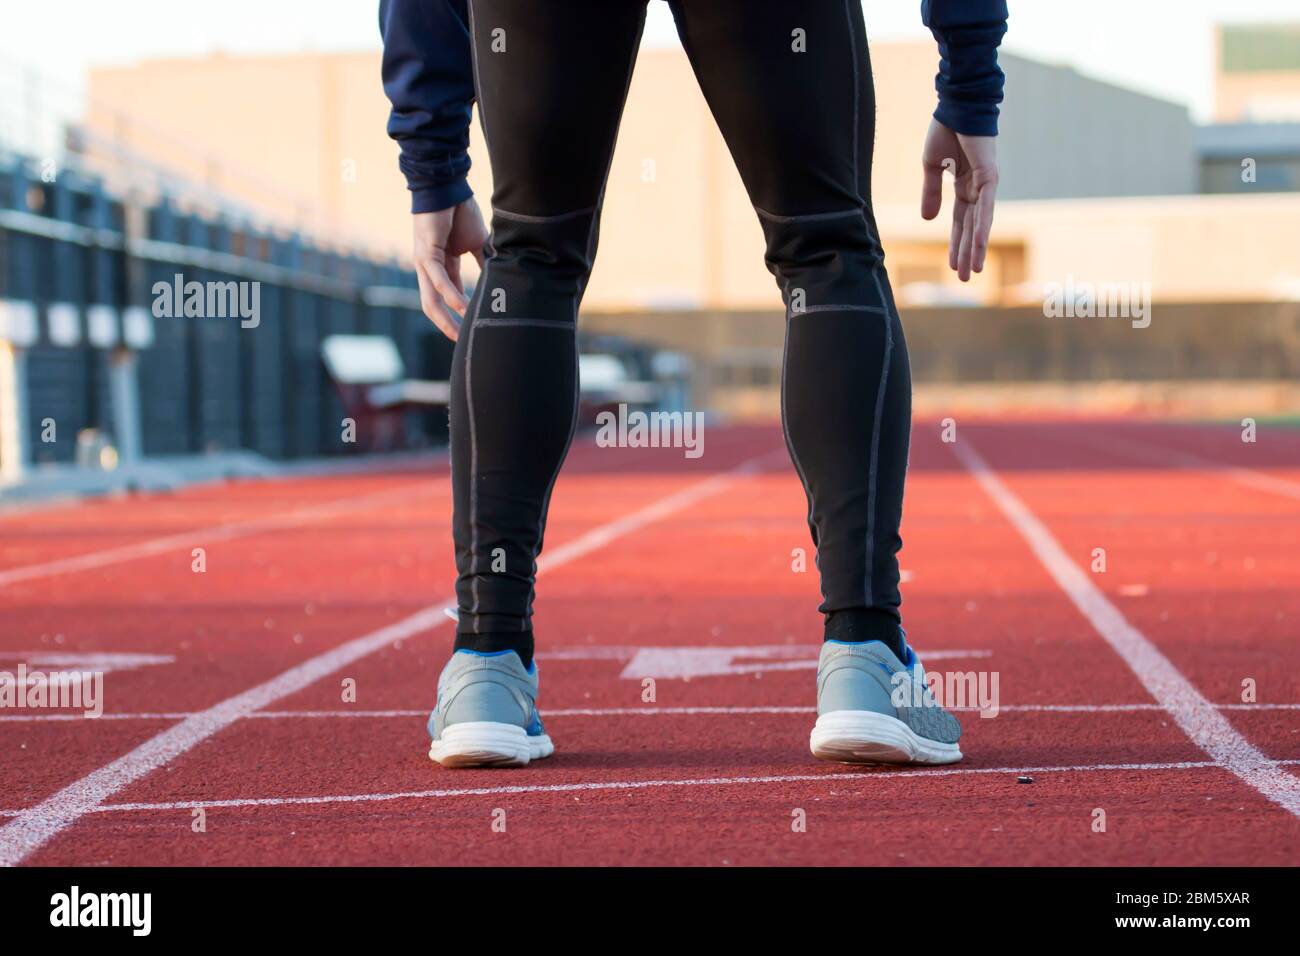 A runner in black spandex gets ready to sprint down a red track Stock Photo